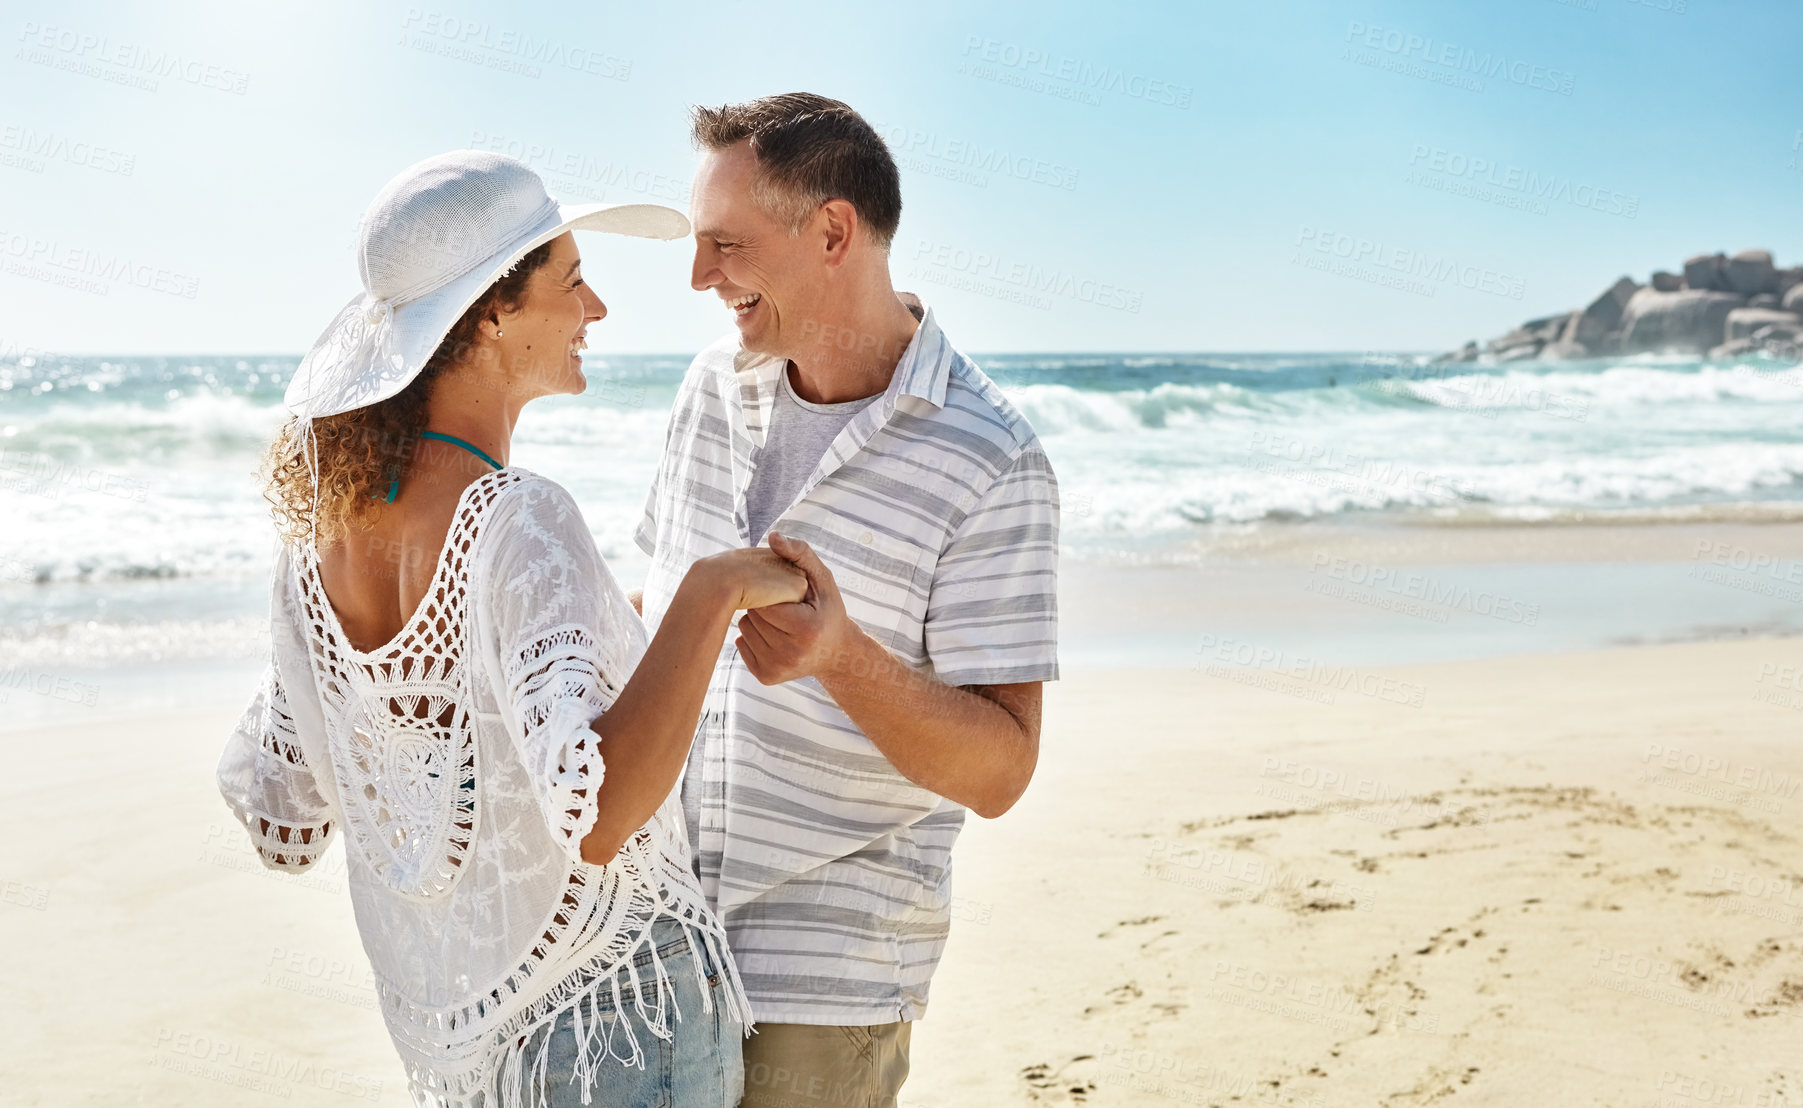 Buy stock photo Shot of a mature couple enjoying some quality time together at the beach